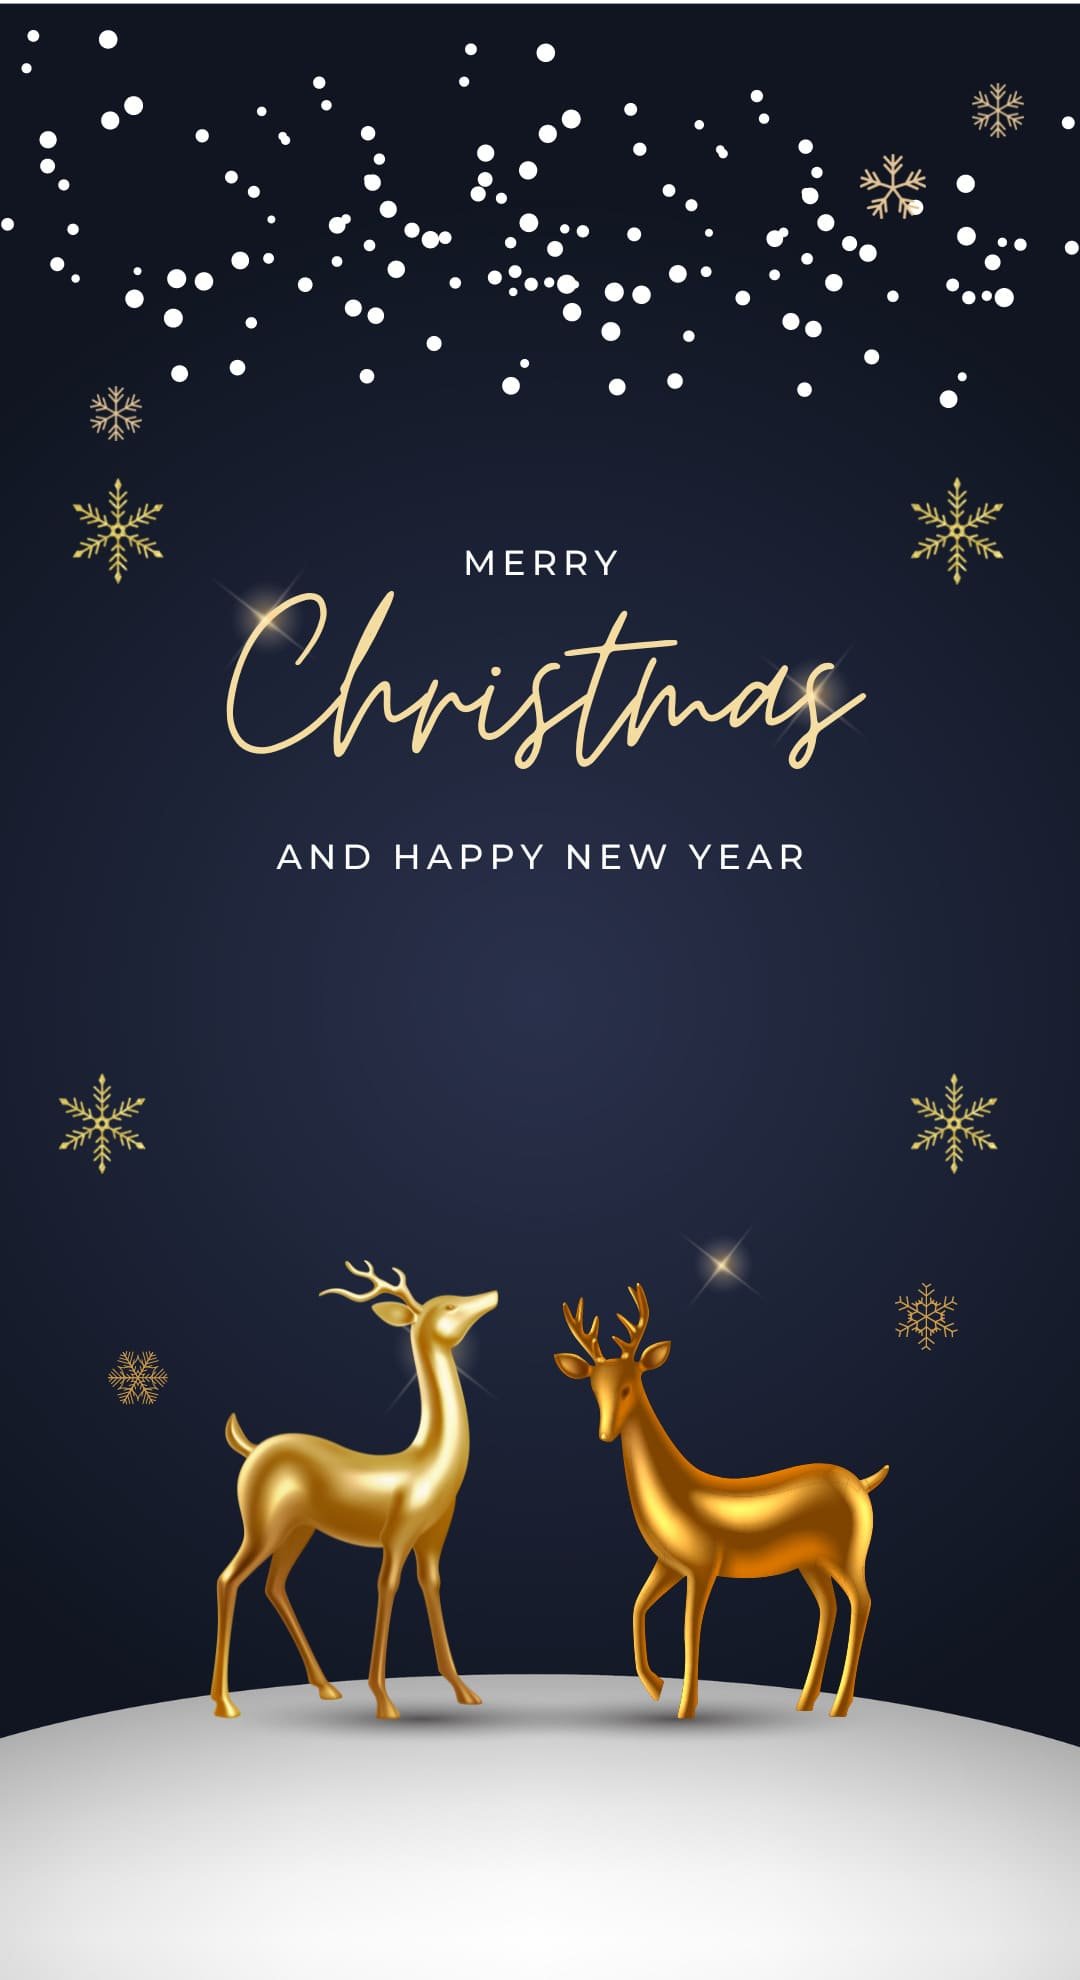 Cute Merry Christmas wallpaper christmas cards online